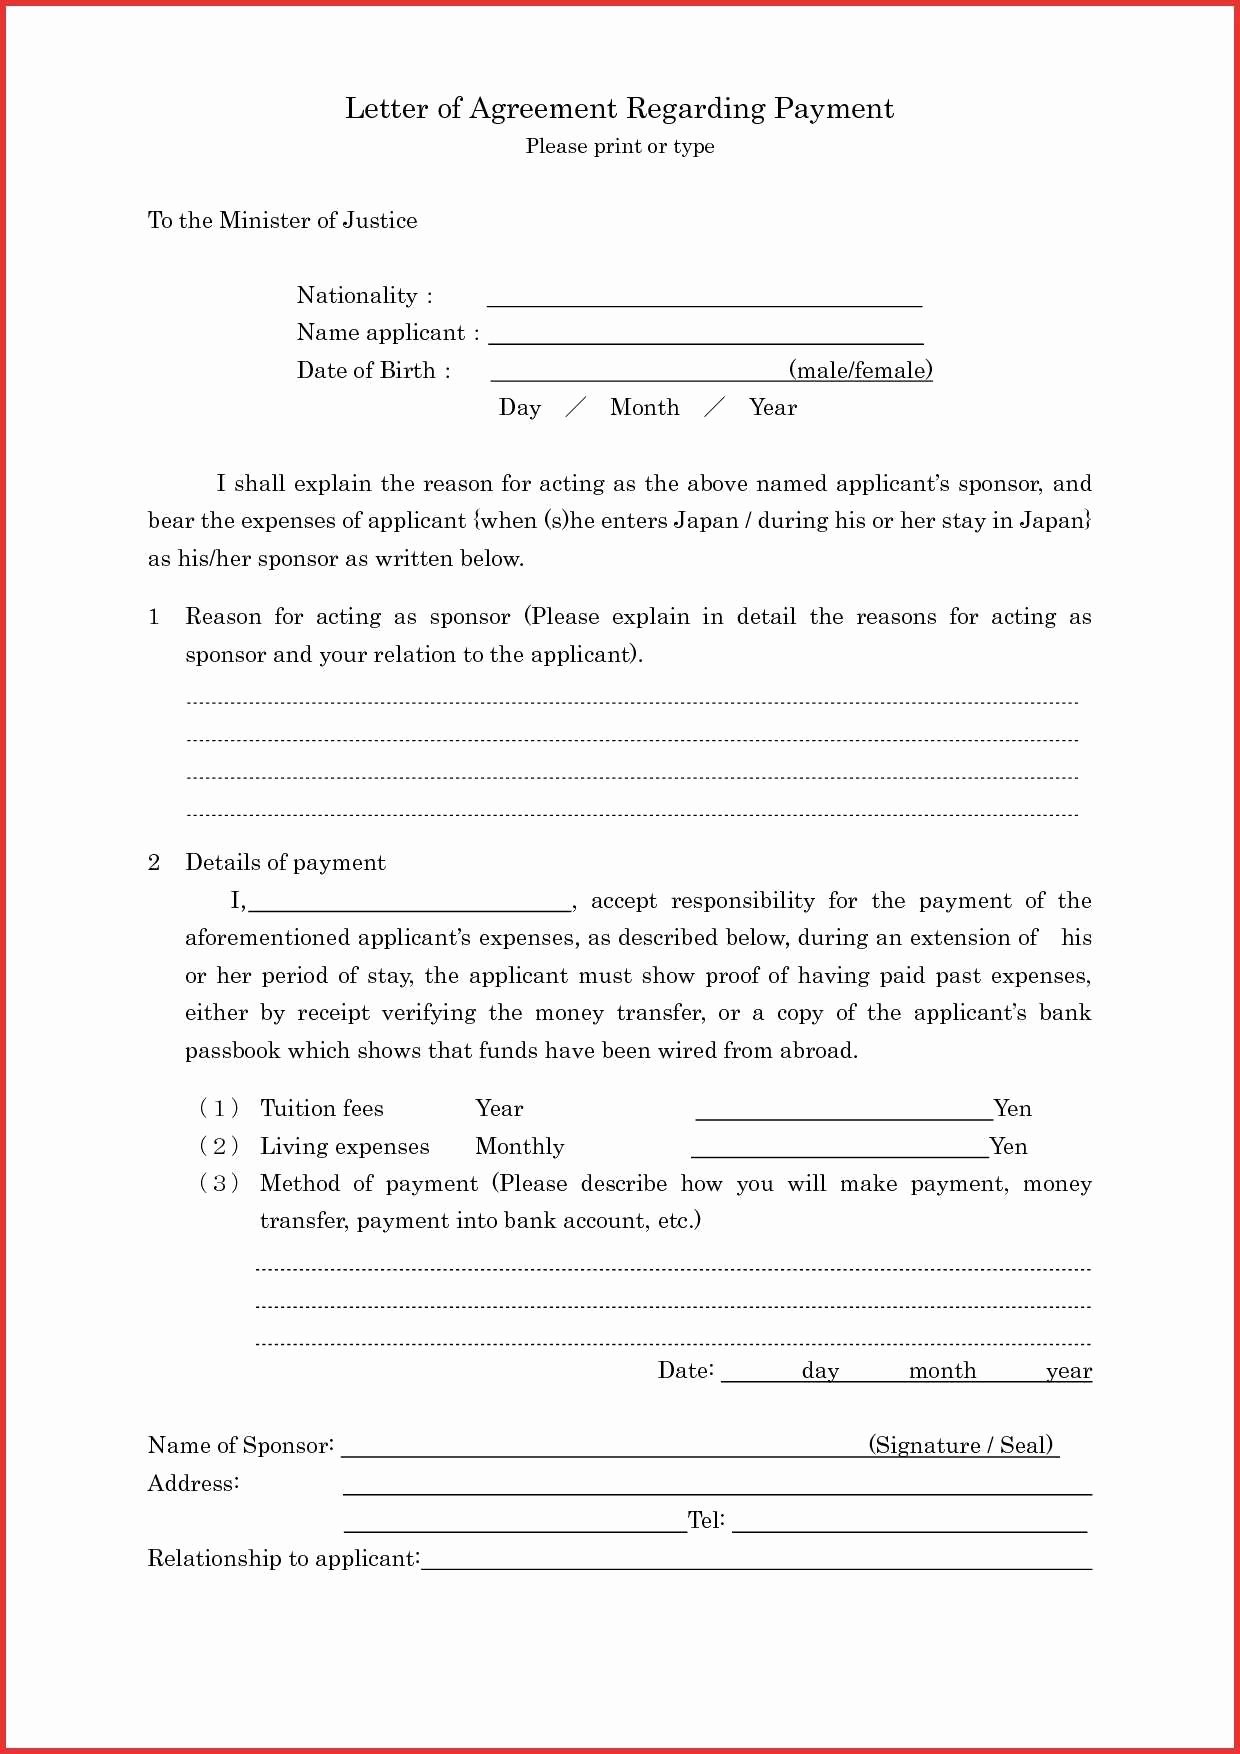 Wire Transfer Instructions Template Beautiful Wire Transfer Agreement form Basic Great Wire Transfer